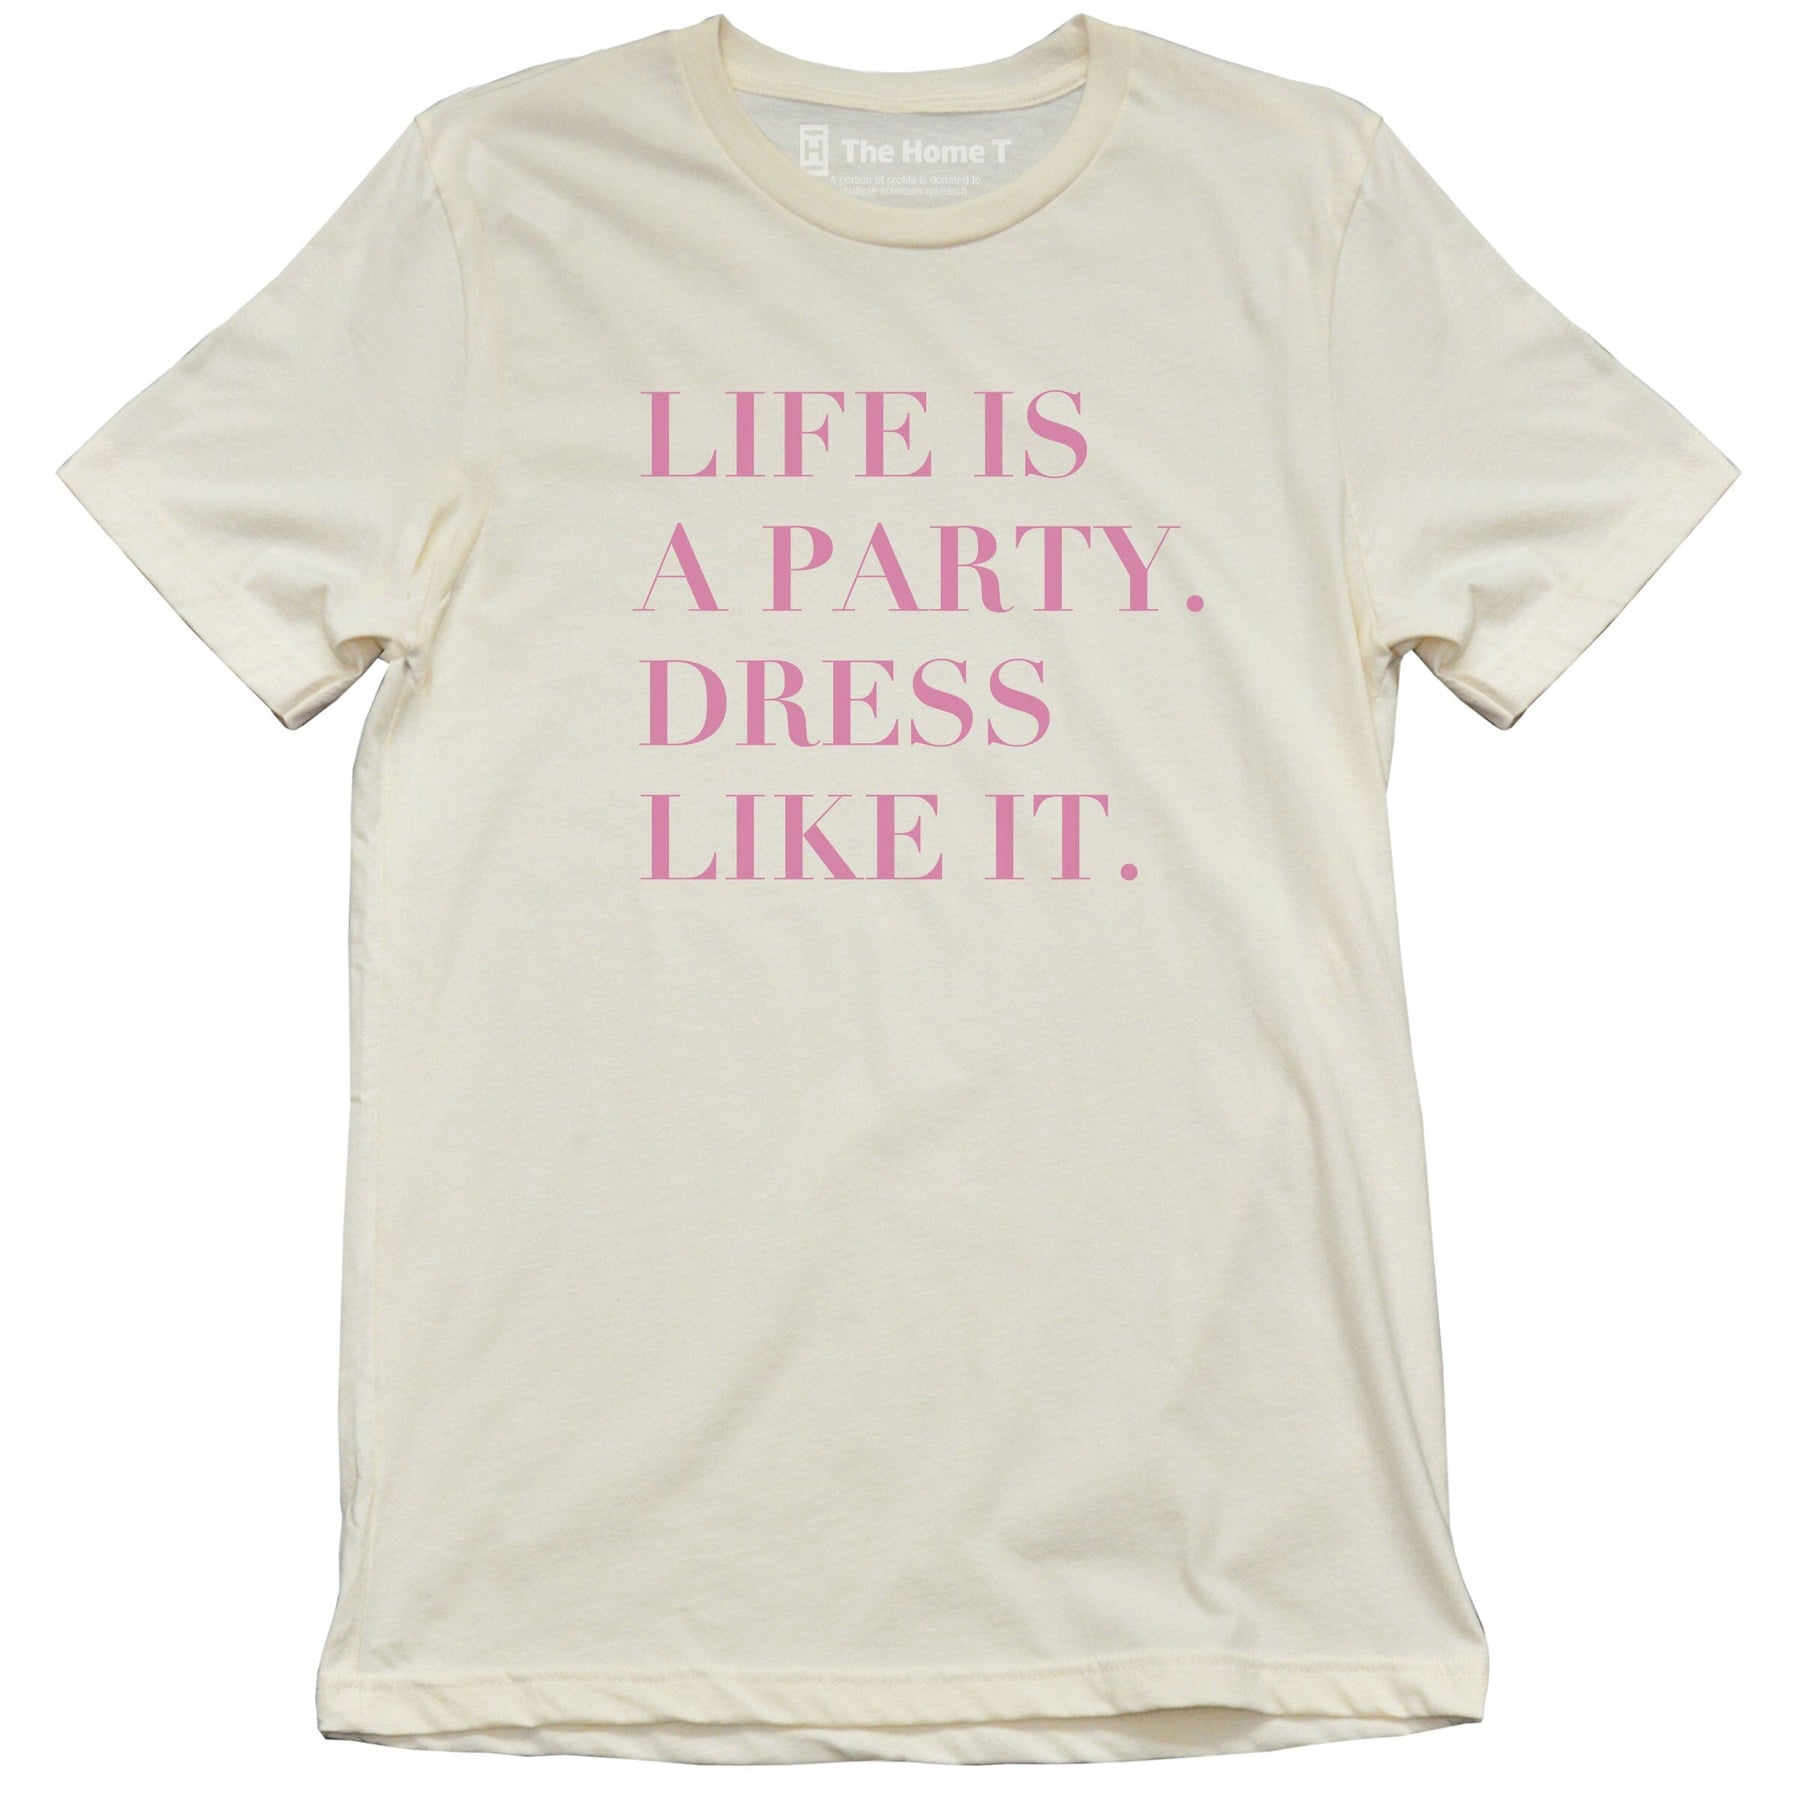 Life is a Party. Dress Like It.